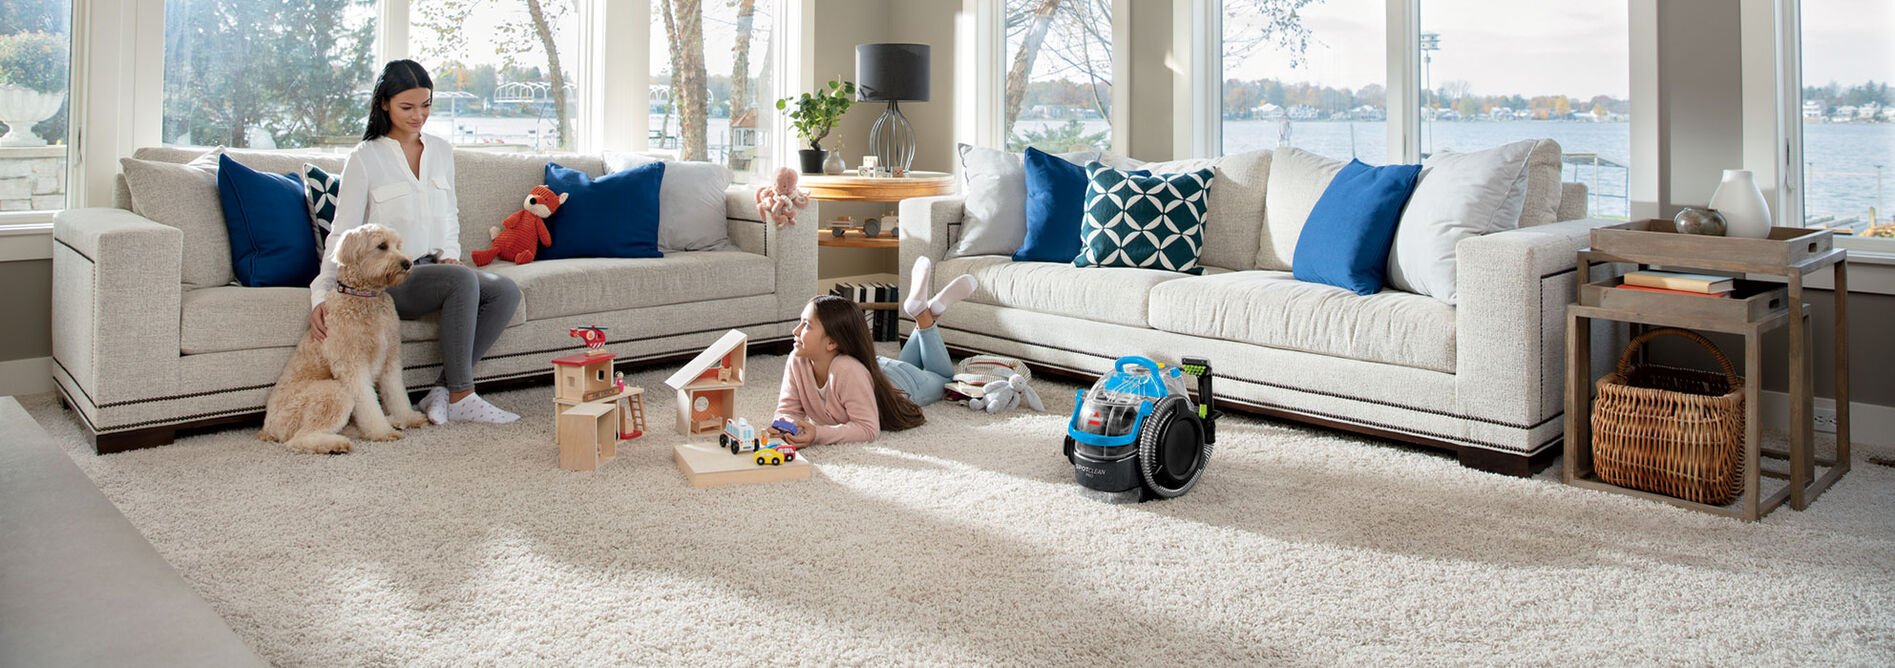 BISSELL SpotClean Pro, Our Most Powerful Portable Carpet Cleaner